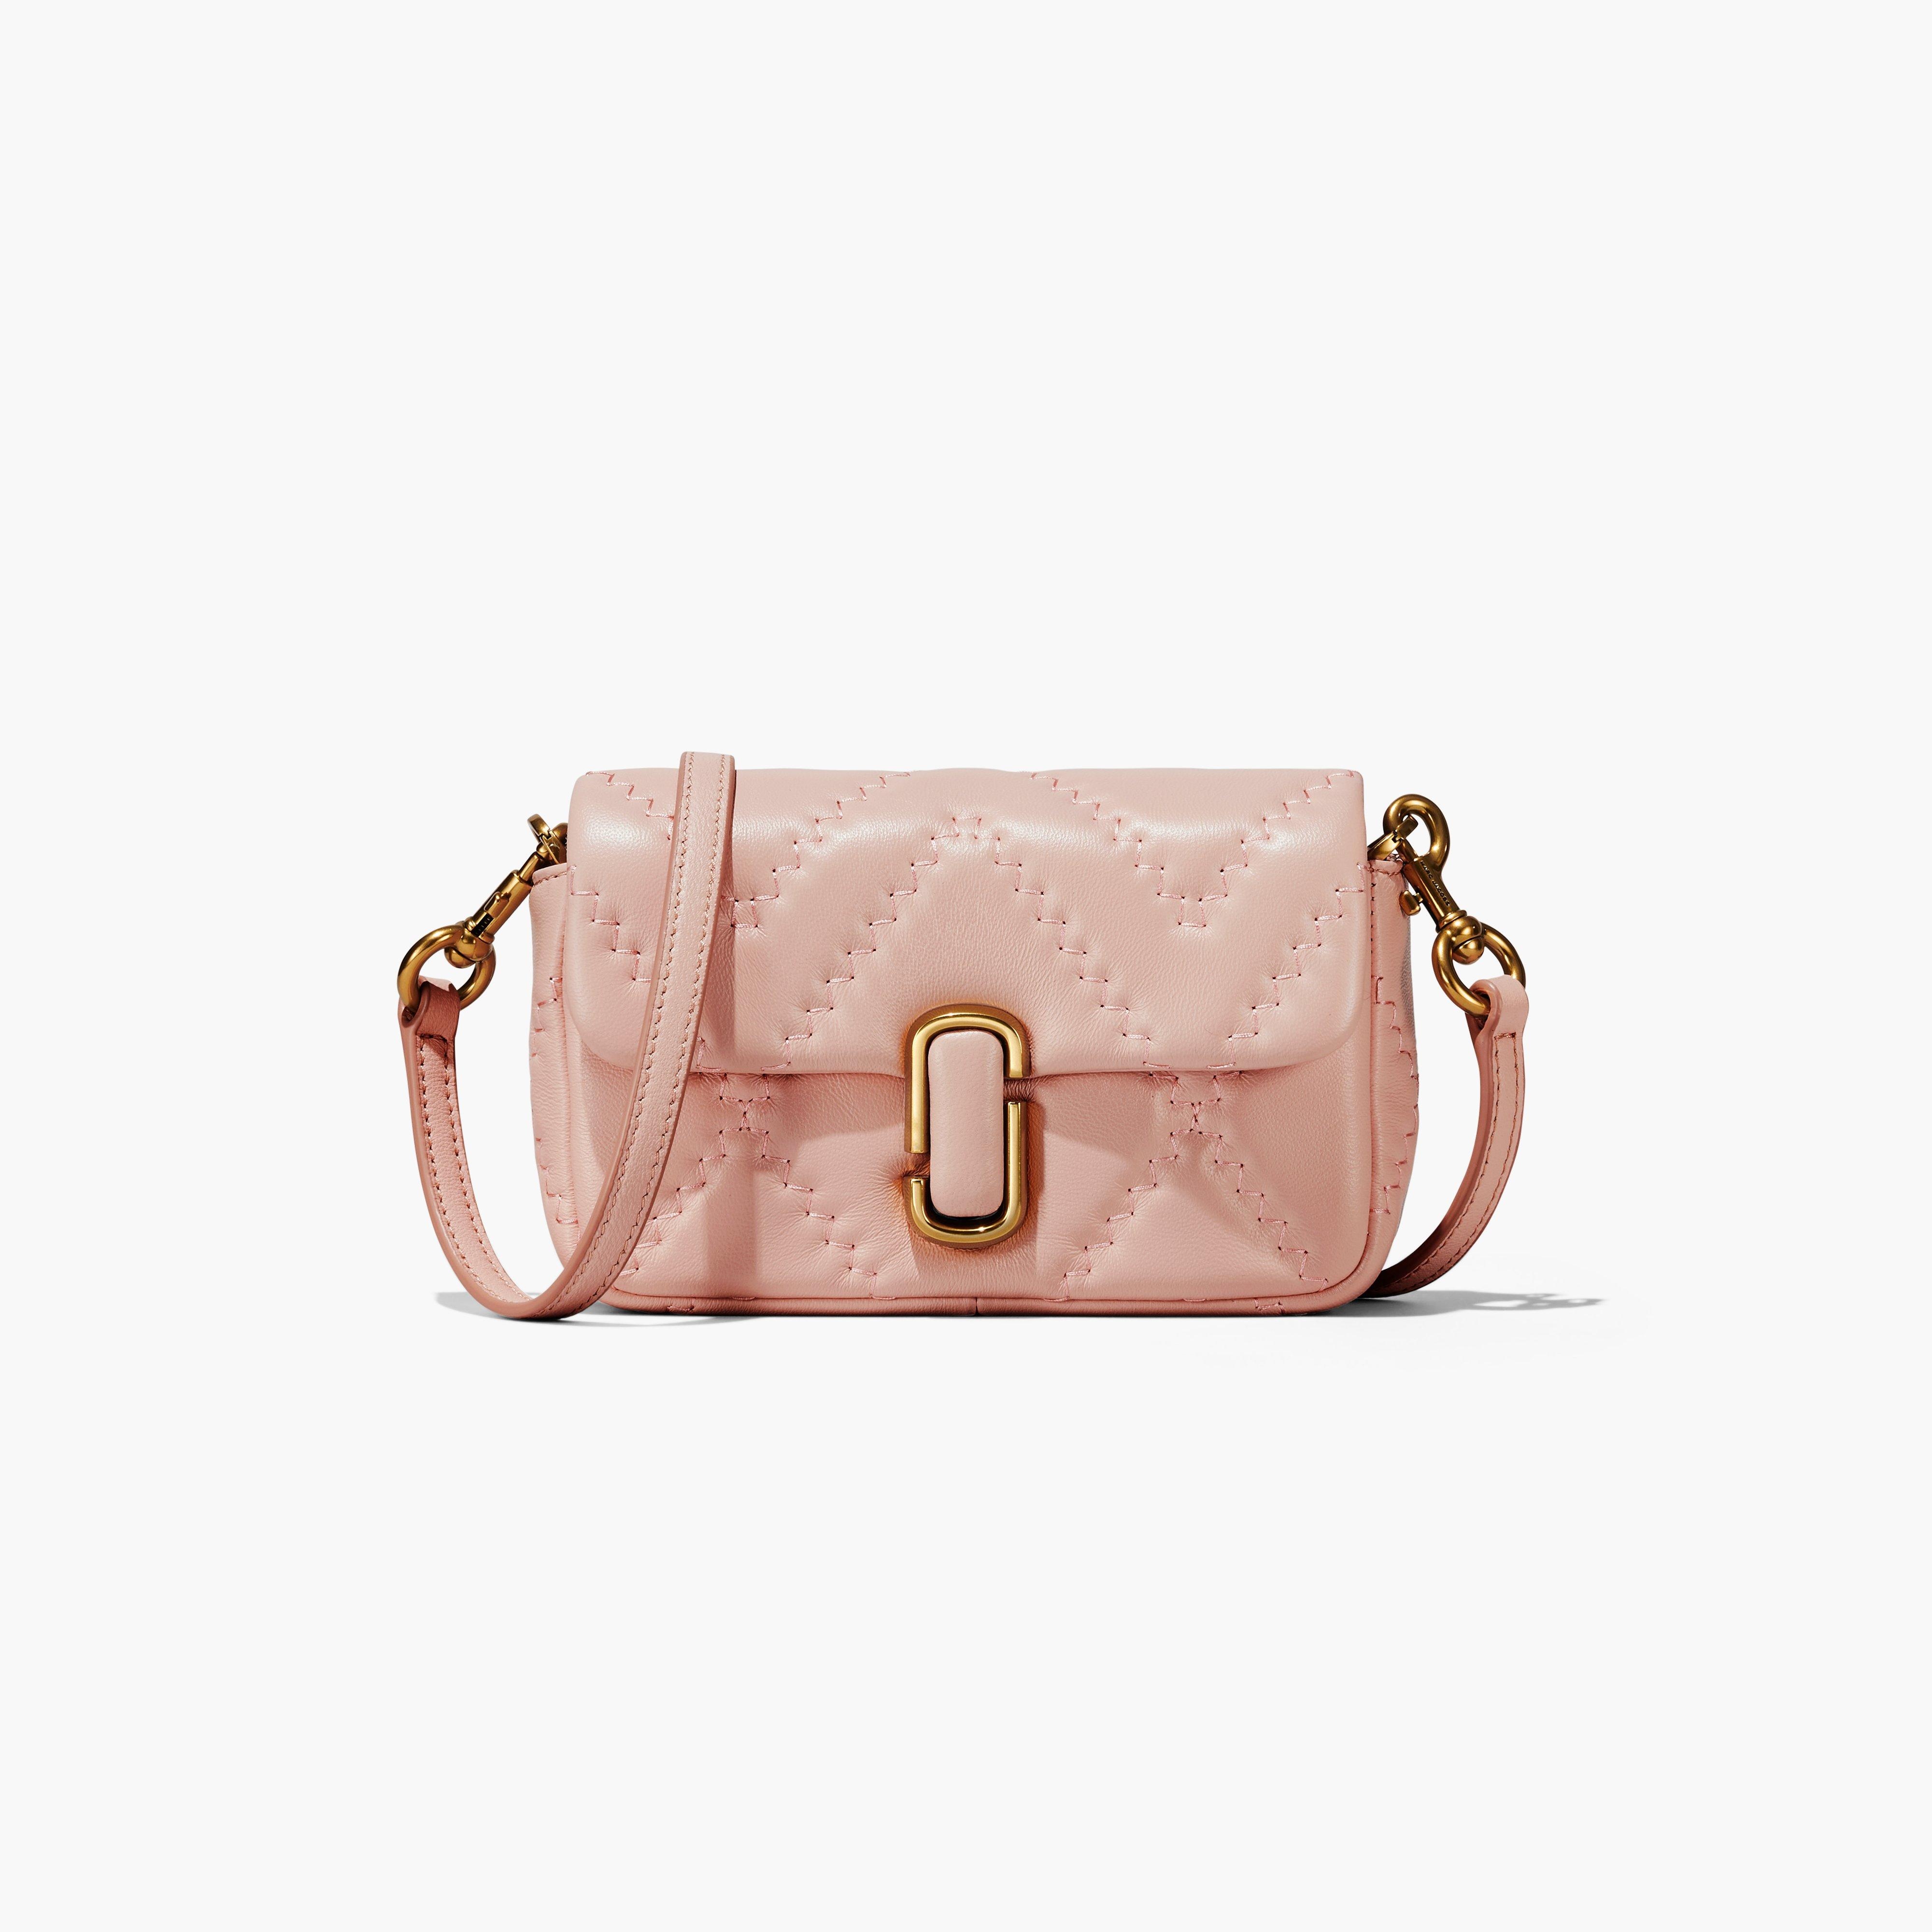 THE QUILTED LEATHER J MARC MINI SHOULDER BAG - 5